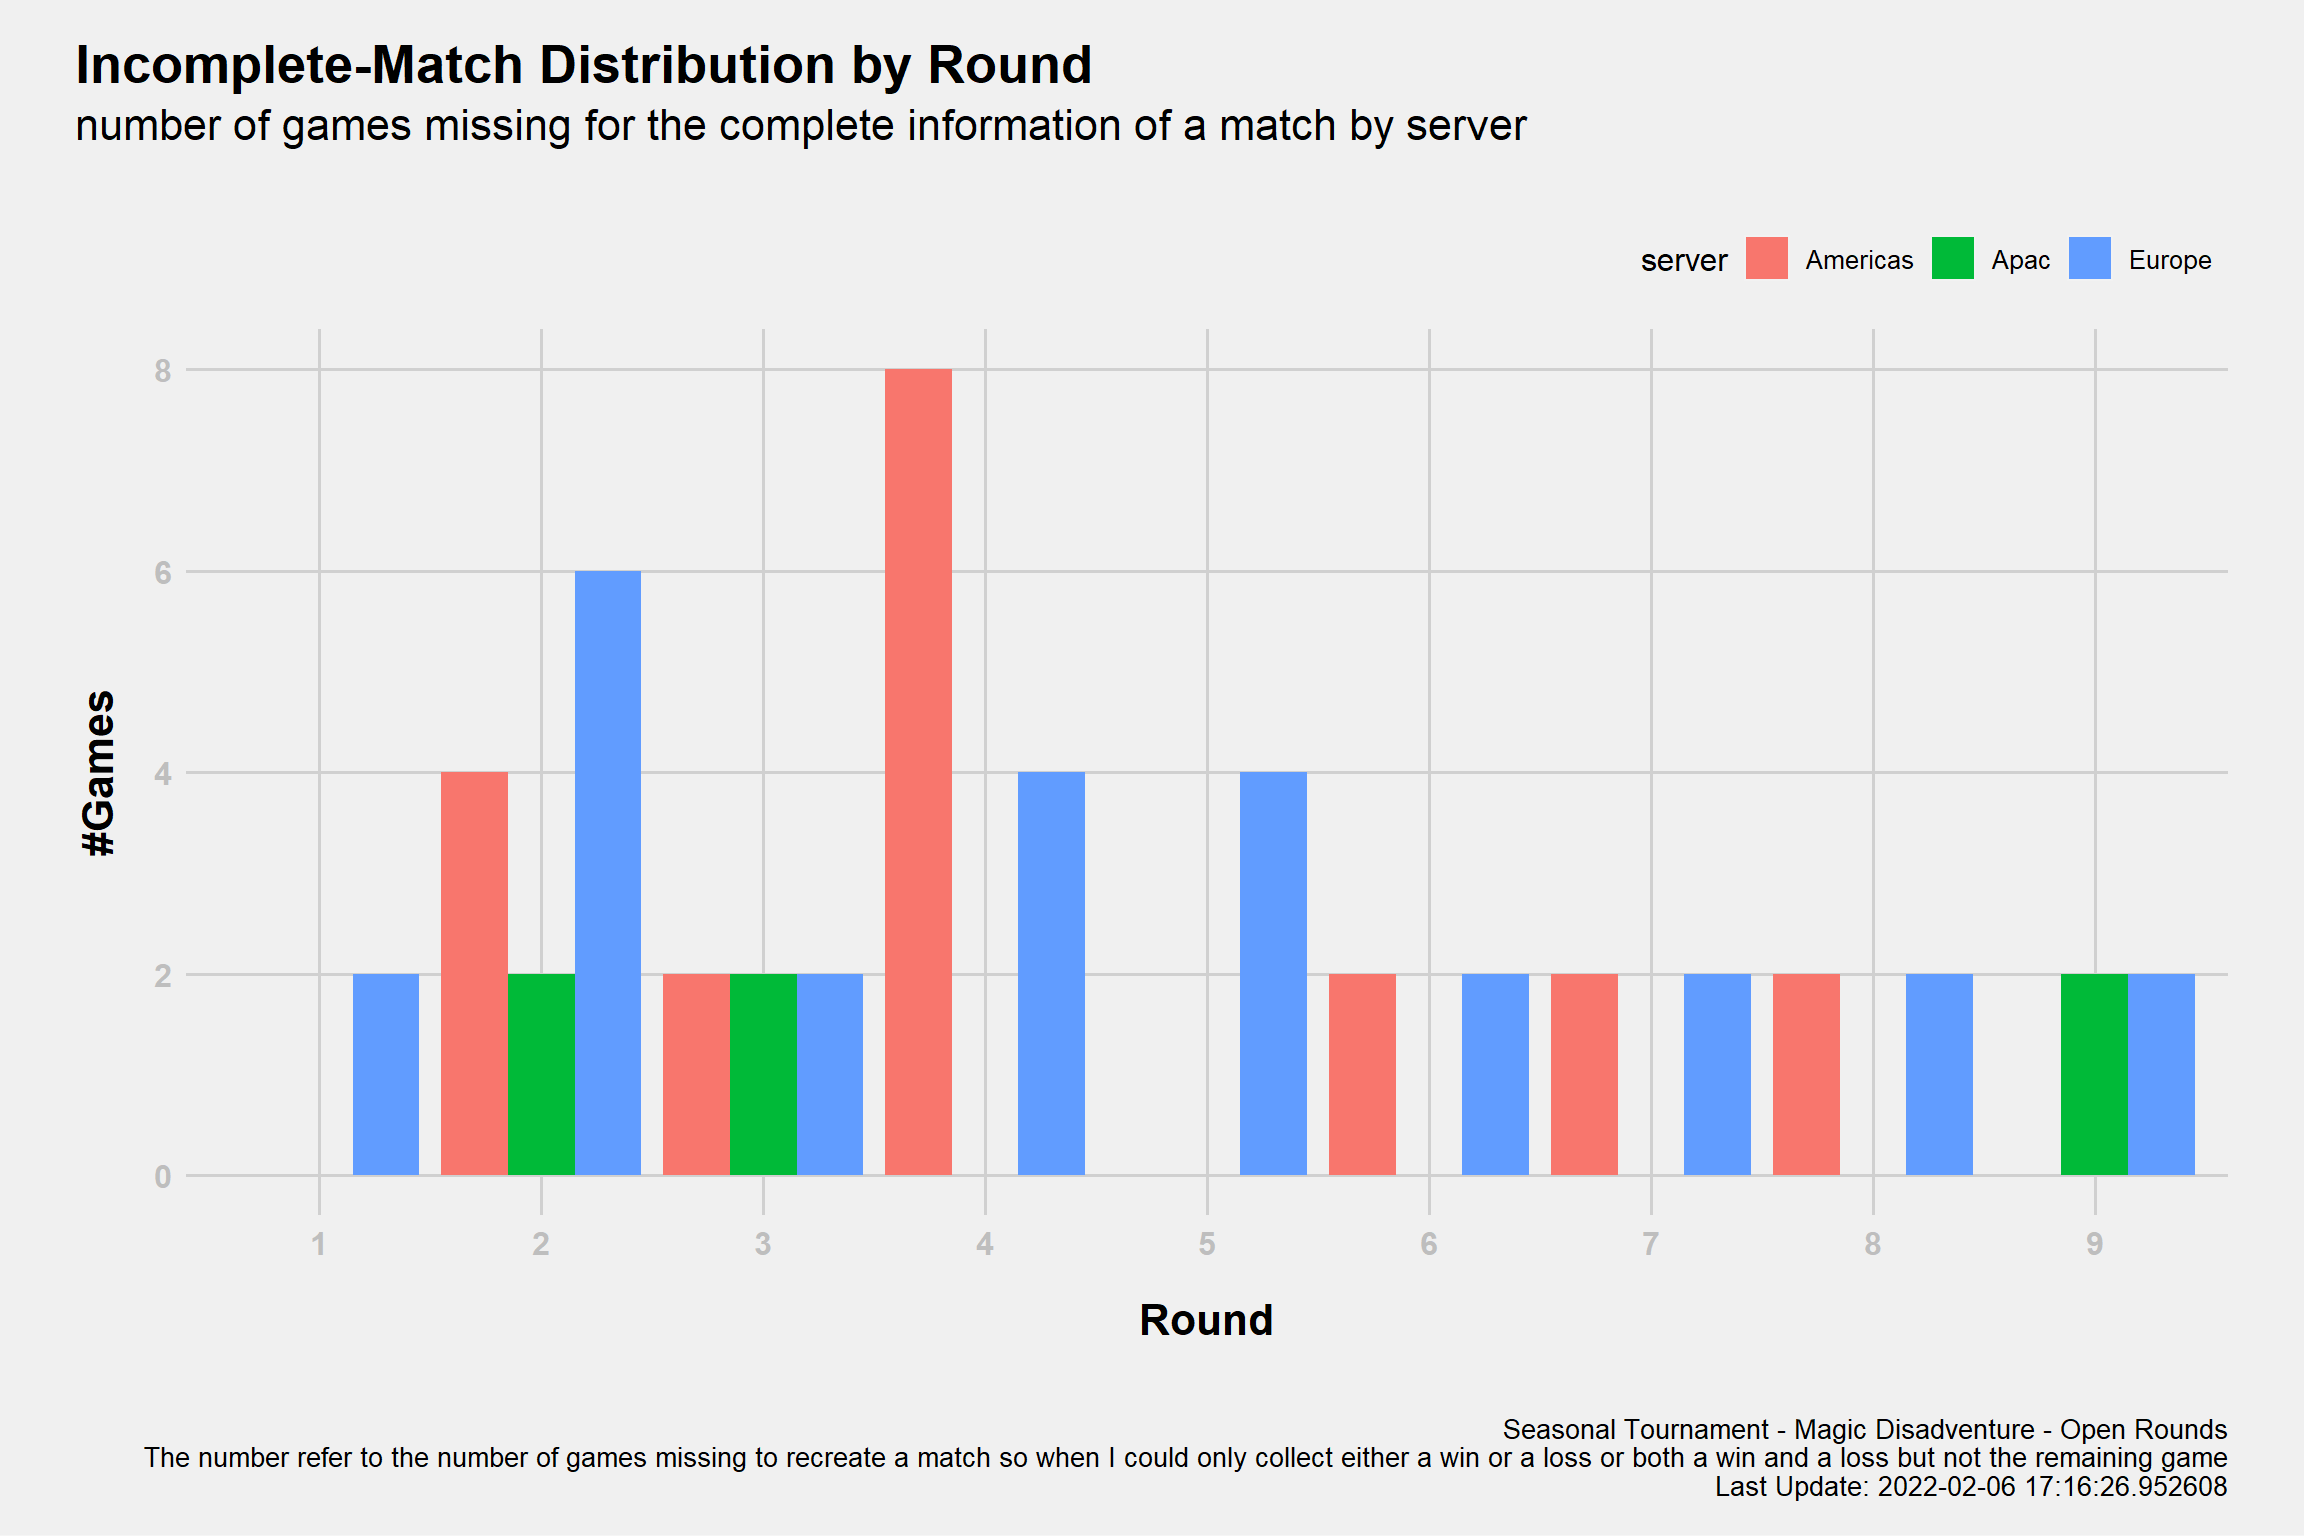 Uncomplete Matches Distribution